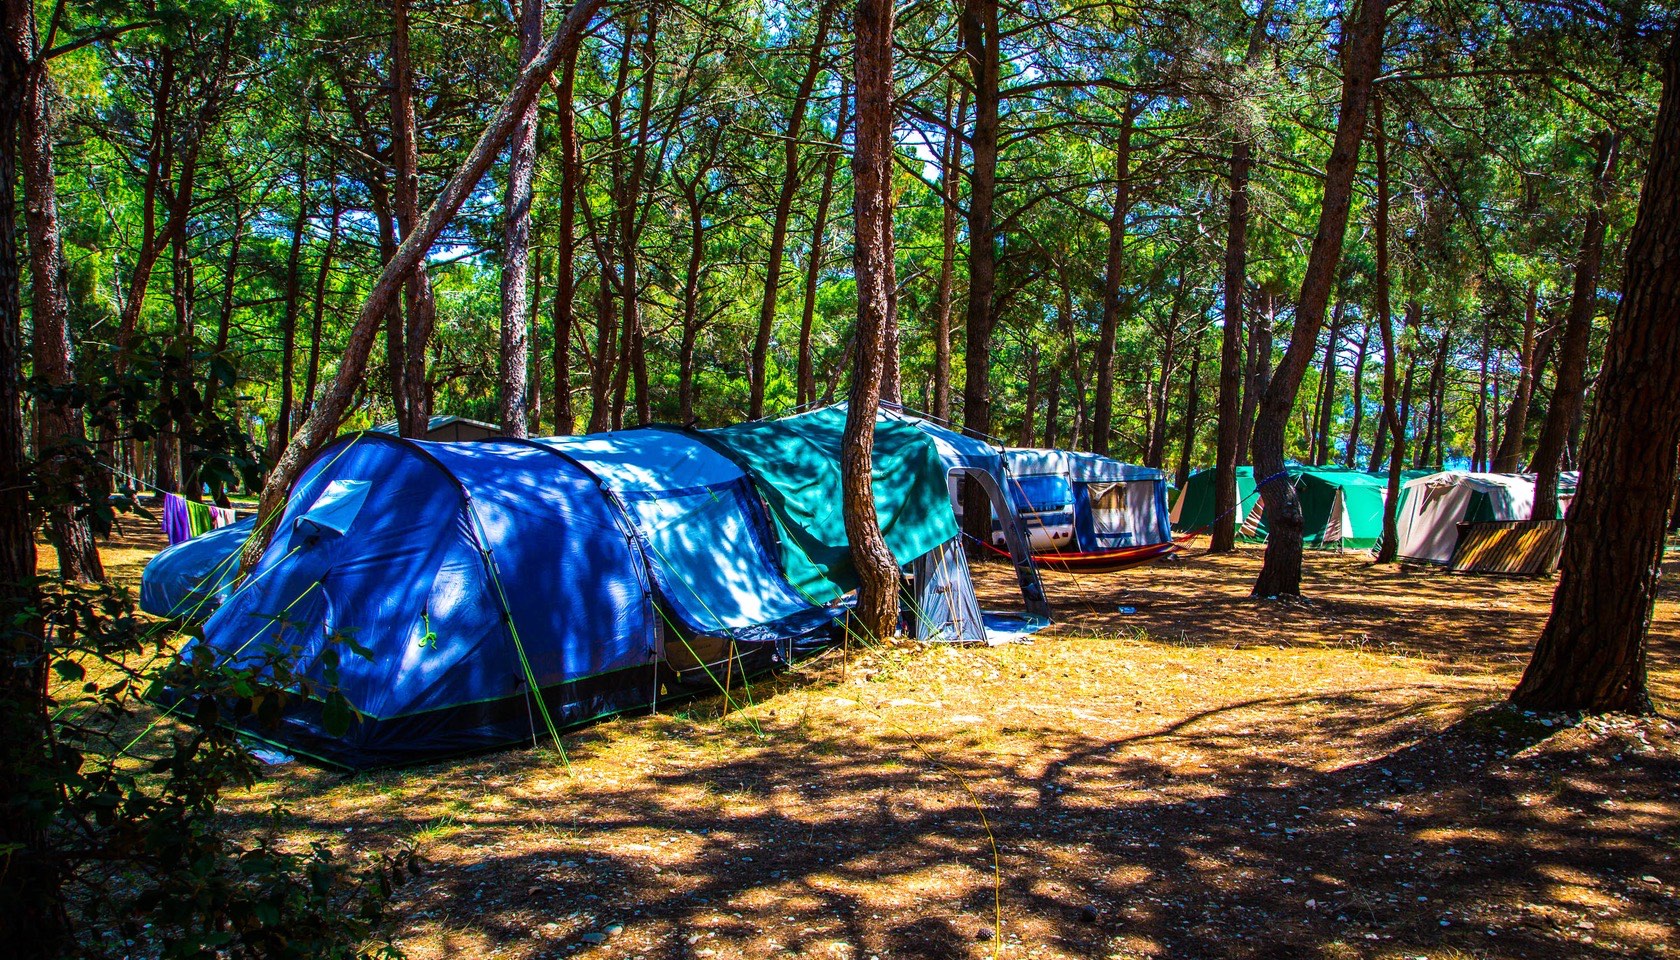 Top Camping Tips To Make Your Experience Great